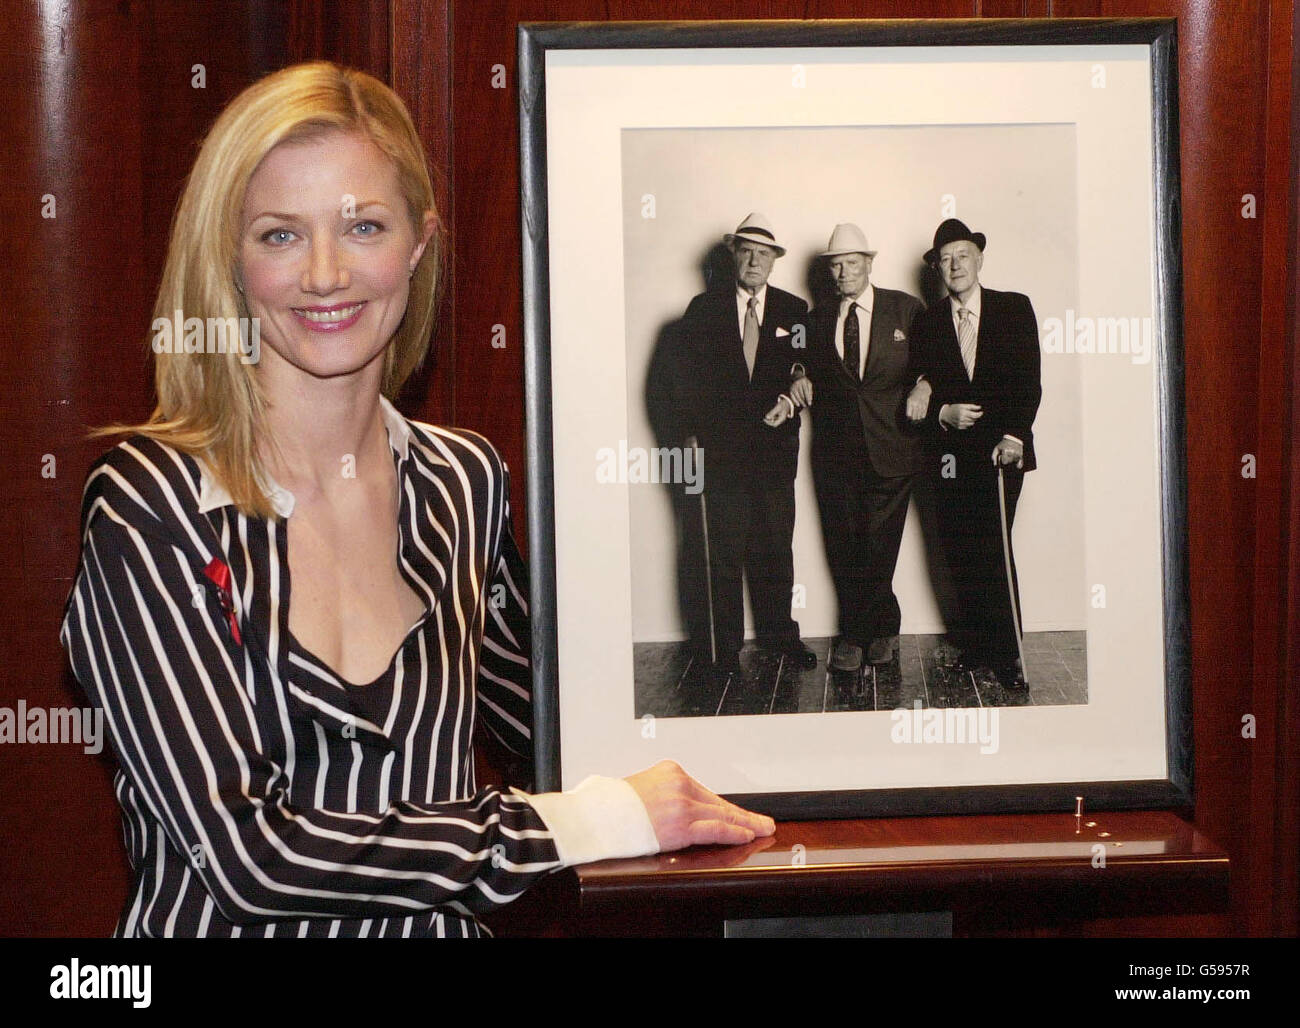 Actress Joely Richardson stands, with a photographic portrait by Terence Donovan of Sir Ralph Richardson, left, Sir Laurence Olivier, centre and Sir Alec Guinness, taken in 1980 on condition that it was only to be published after their deaths. * The photograph is to be auctioned with 53 other lots at Christie's, London on 22 January to raise funds for the HIV charity, the London Lighthouse. R/I: 23/01/01. Stock Photo